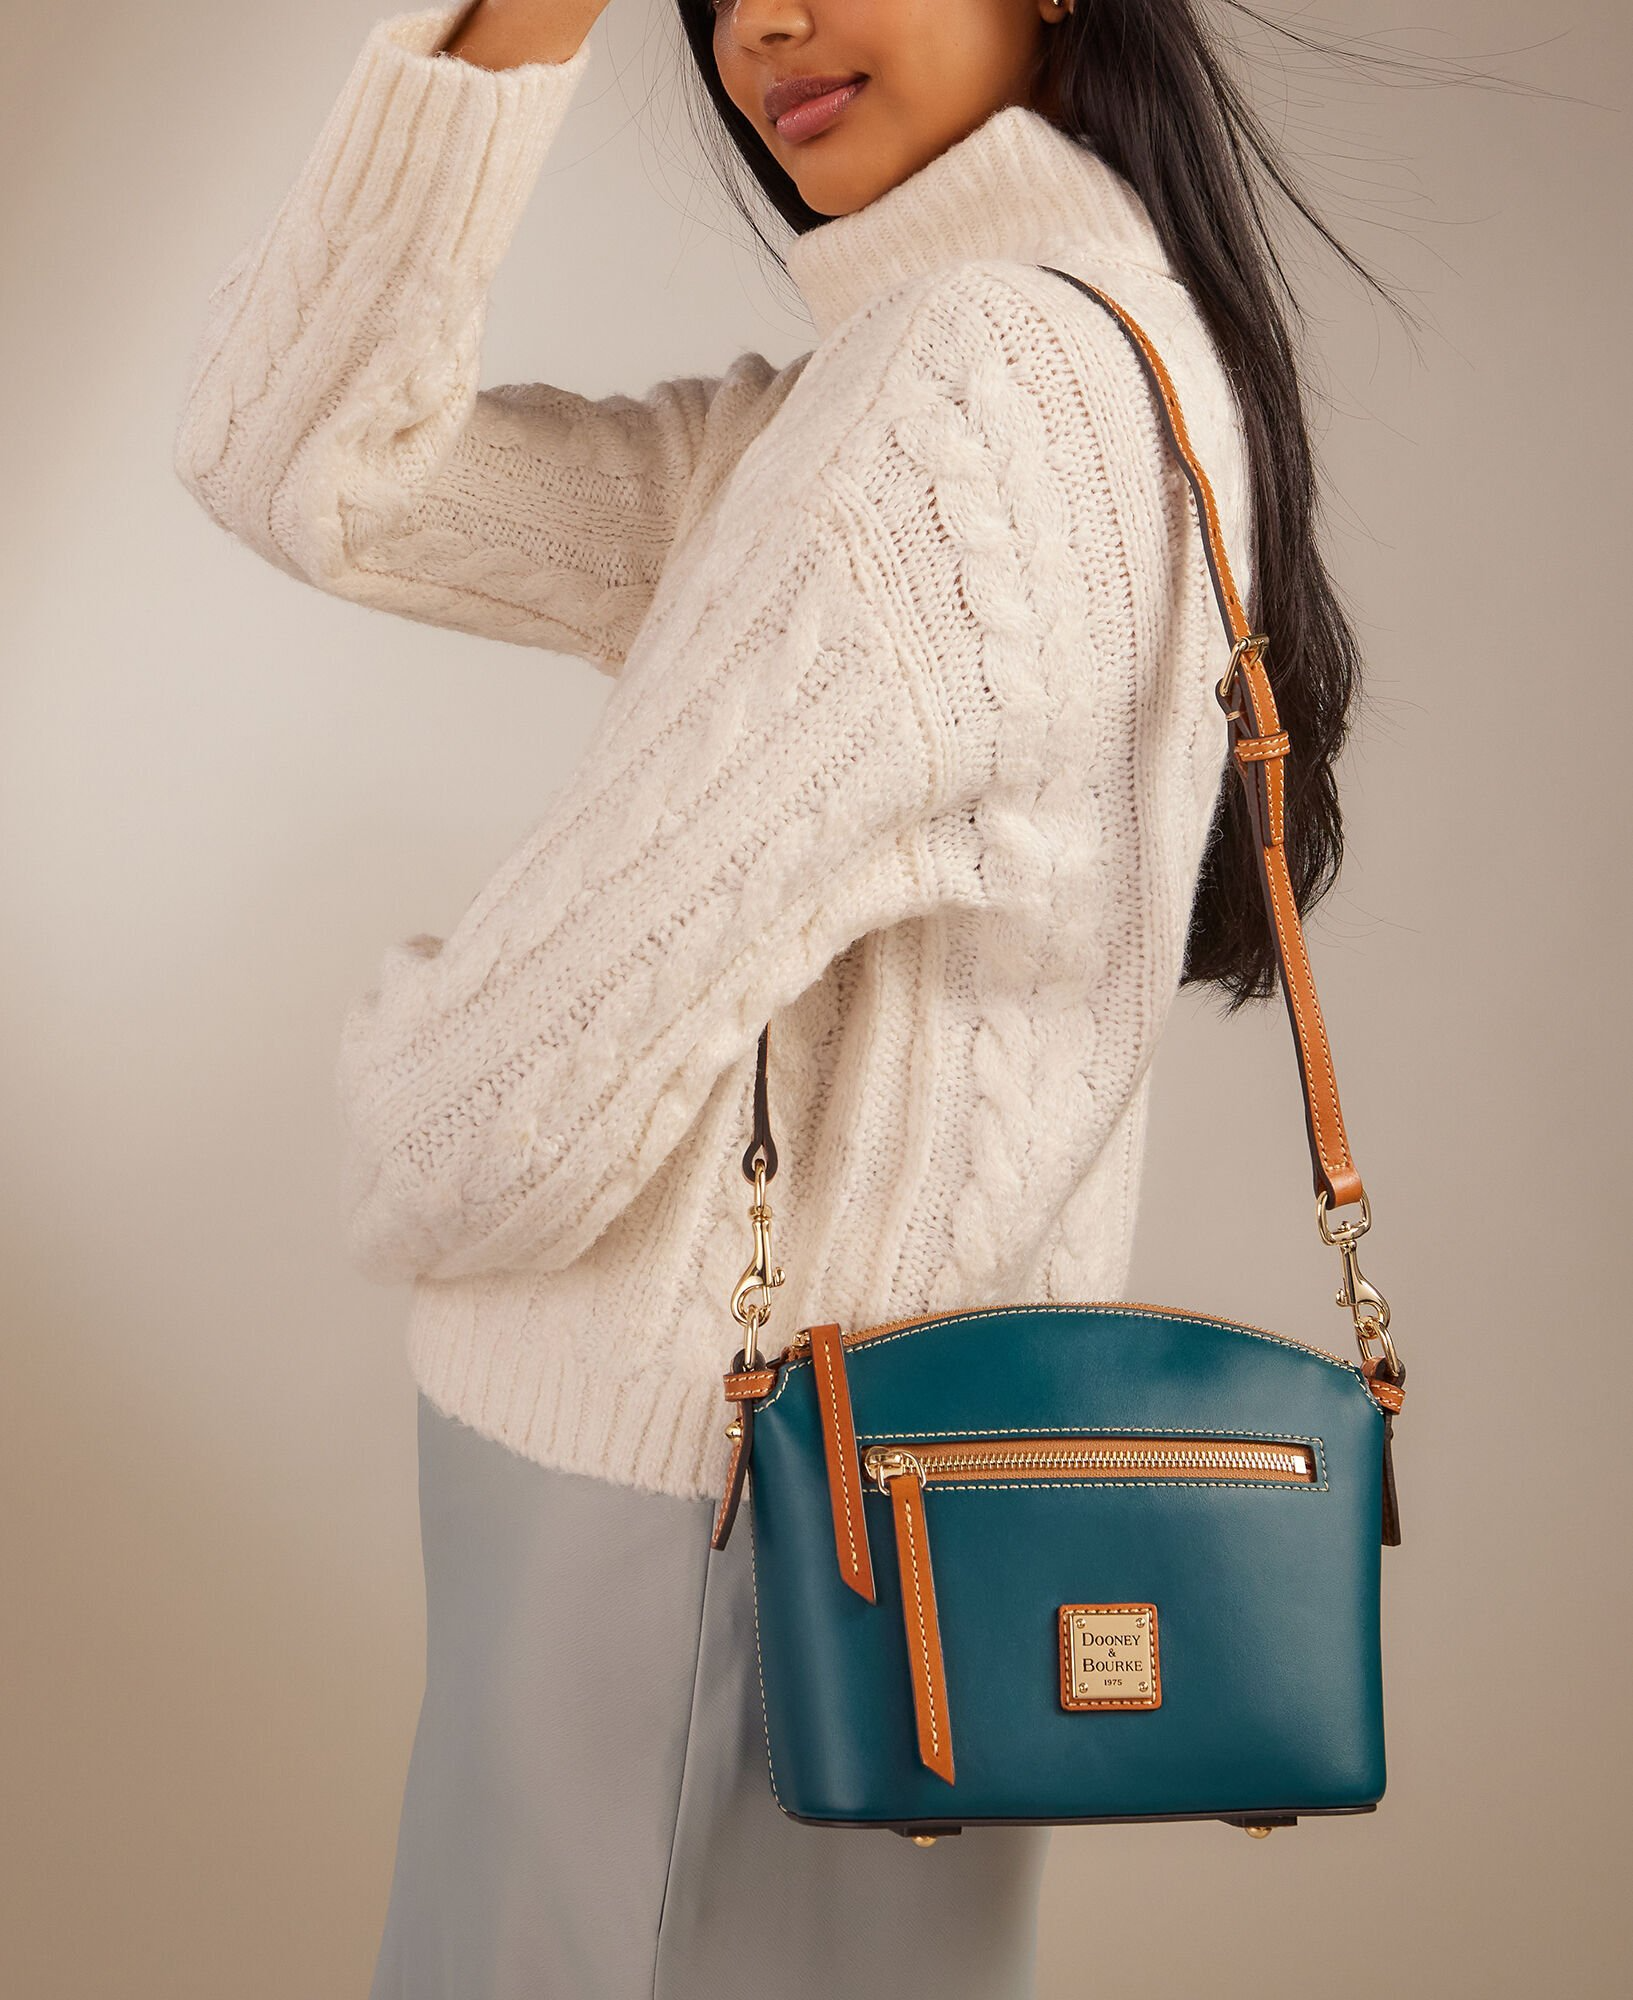 A woman is wearing a white cable knit sweater and carrying a teal crossbody bag with tan accents.